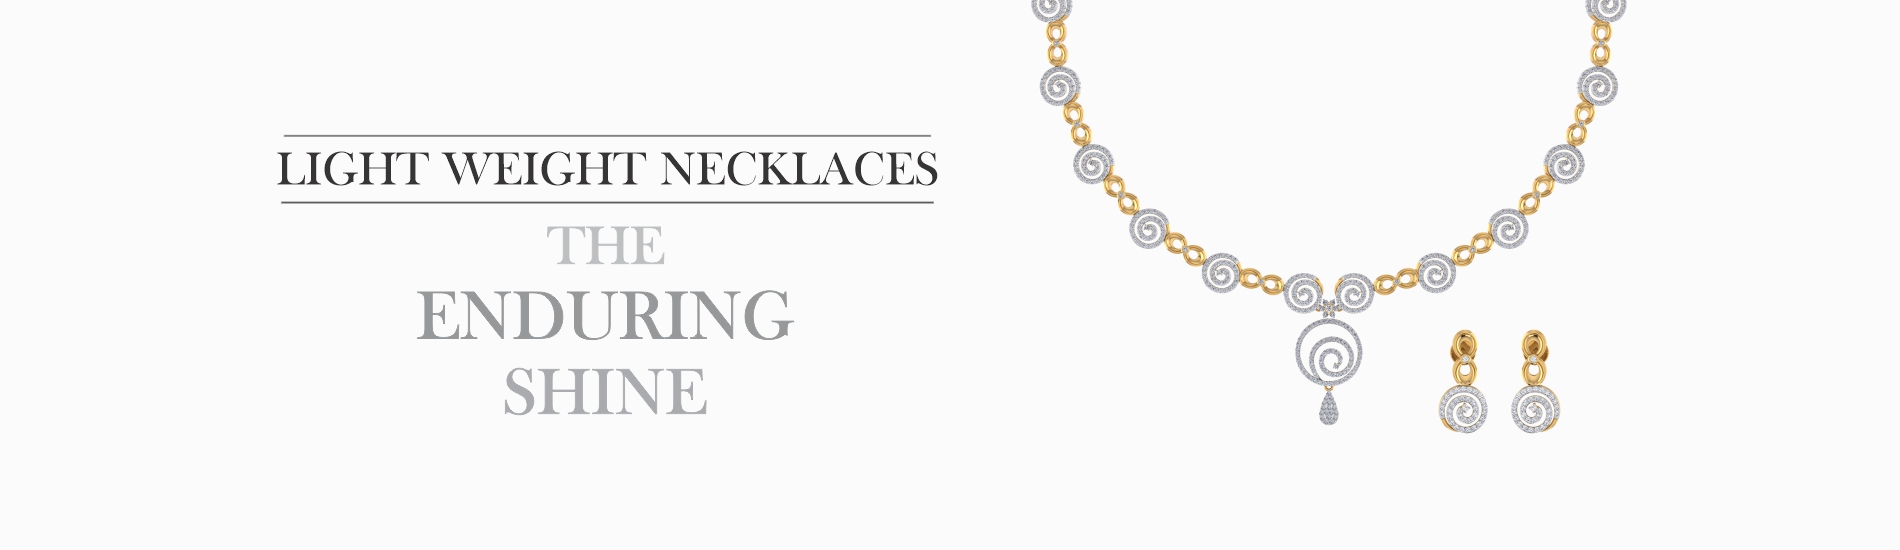 Necklace Banner